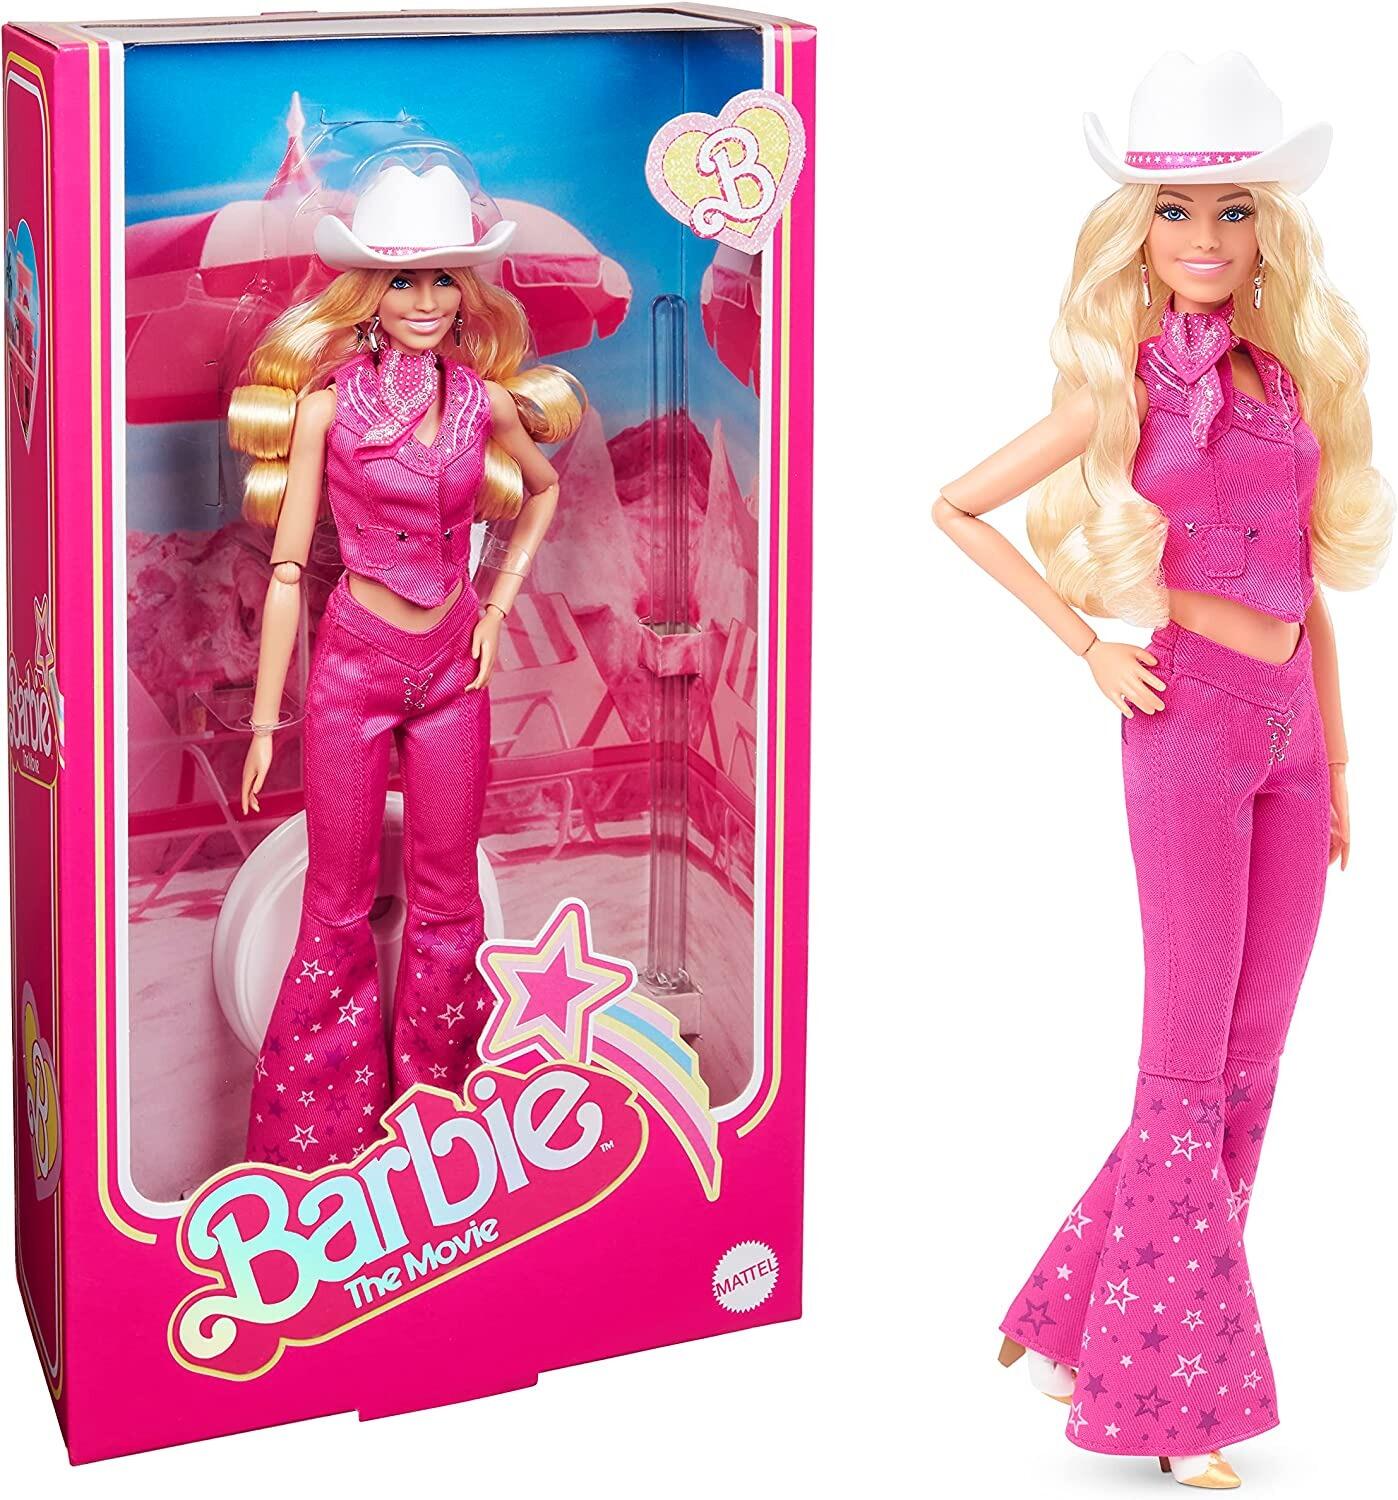 Barbie The Movie Doll, Margot Robbie as Barbie, Collectible Doll Wearing Pink Western Outfit with Cowboy Hat